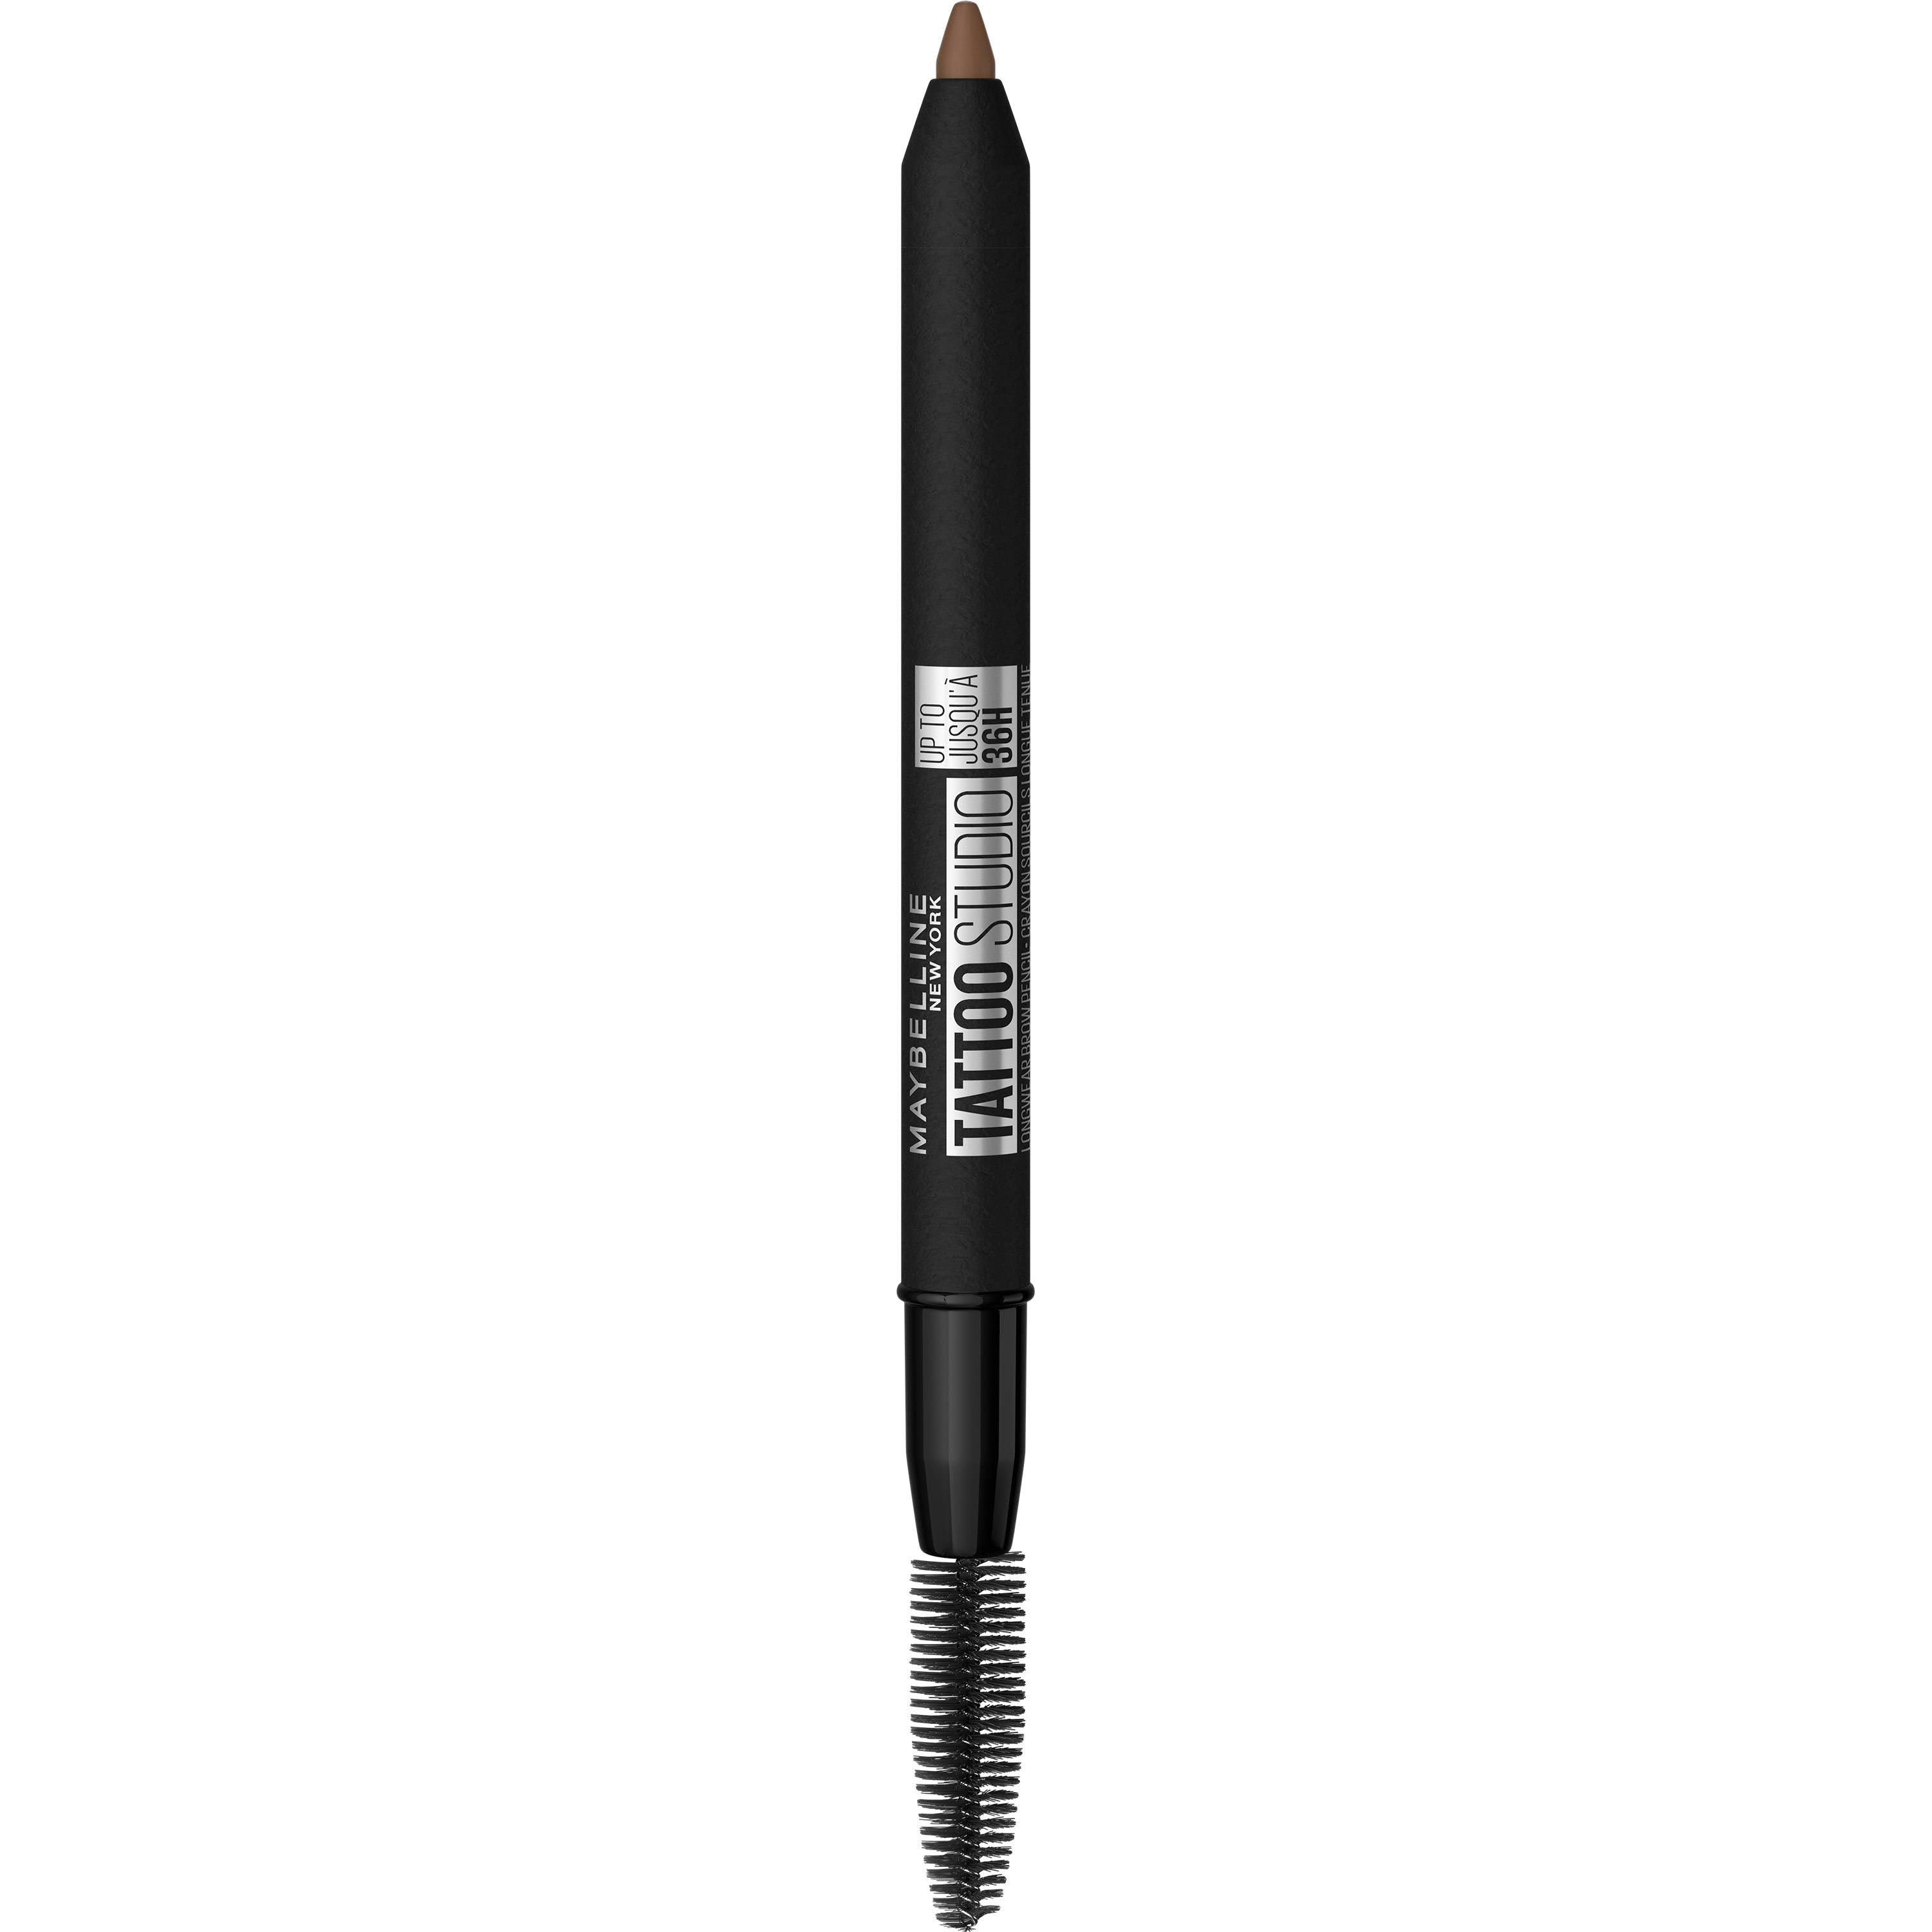 Maybelline Tattoo Brow 36Hr Pigment Brow Pencil Soft Brown